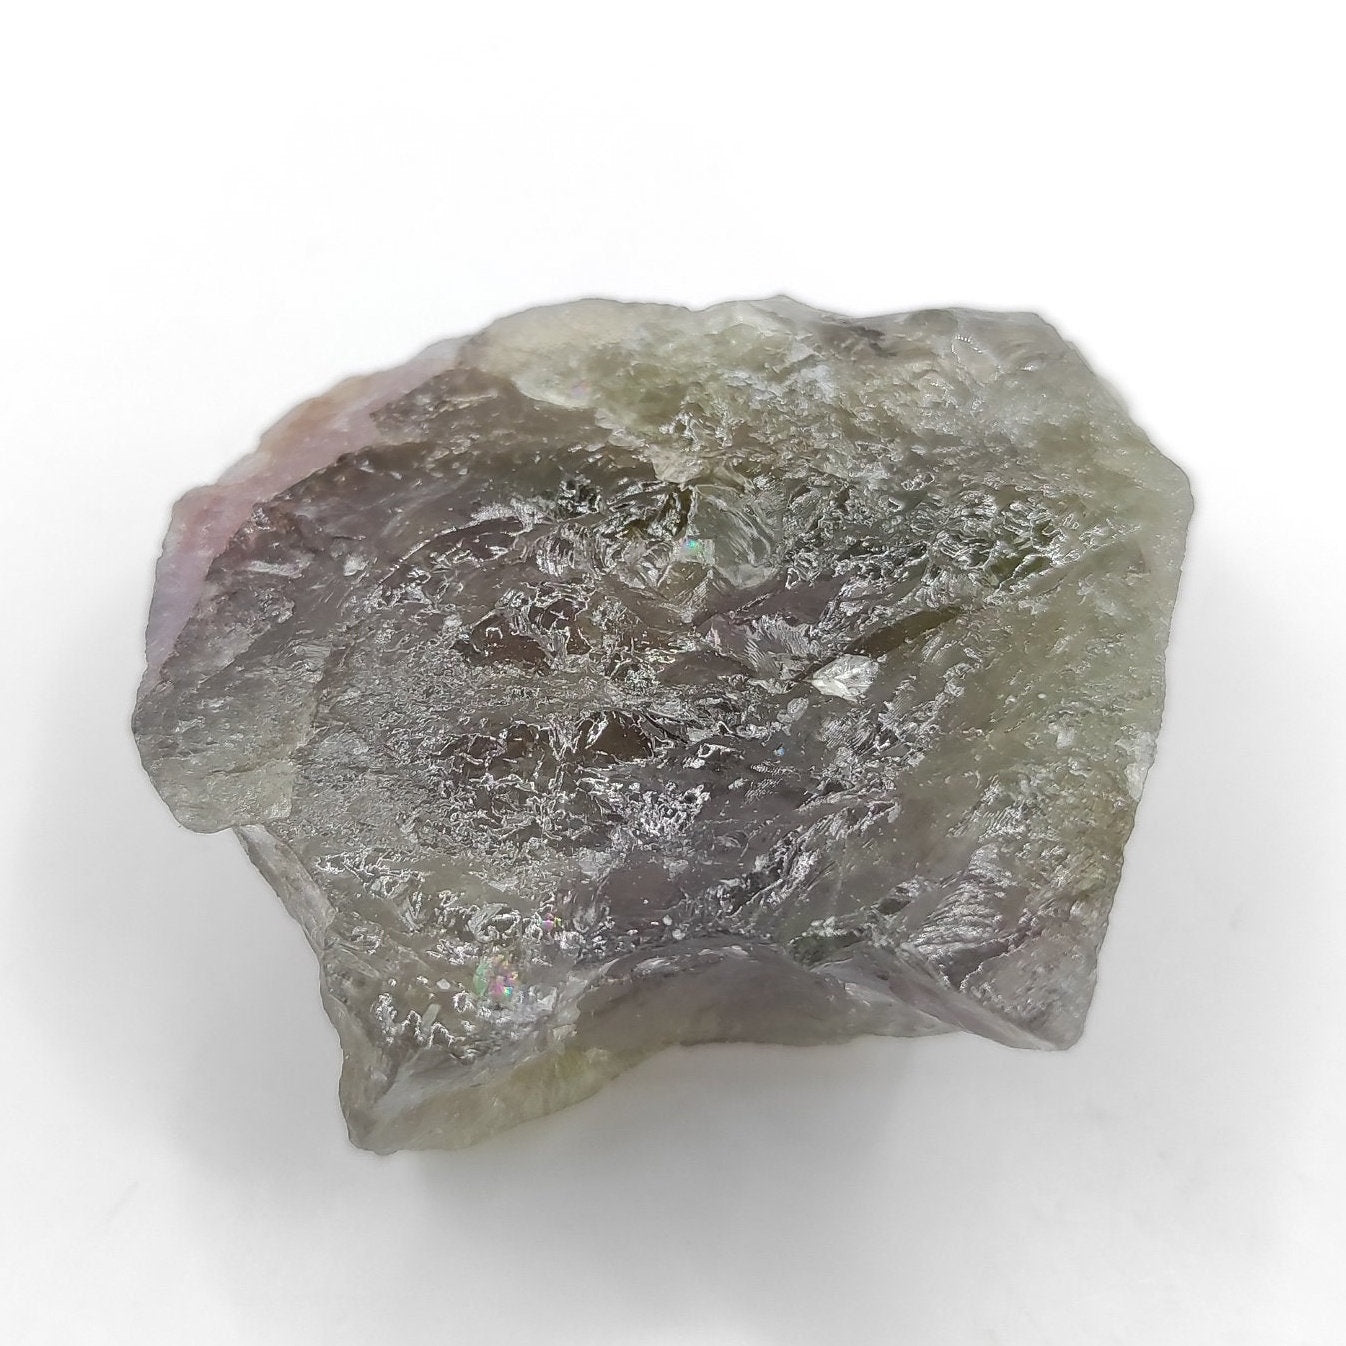 36g Genuine Auralite 23 with Natural Green Amethyst - Rare Unheated Green Amethyst - Thunder Bay Amethyst - Ethical Crystals from Canada